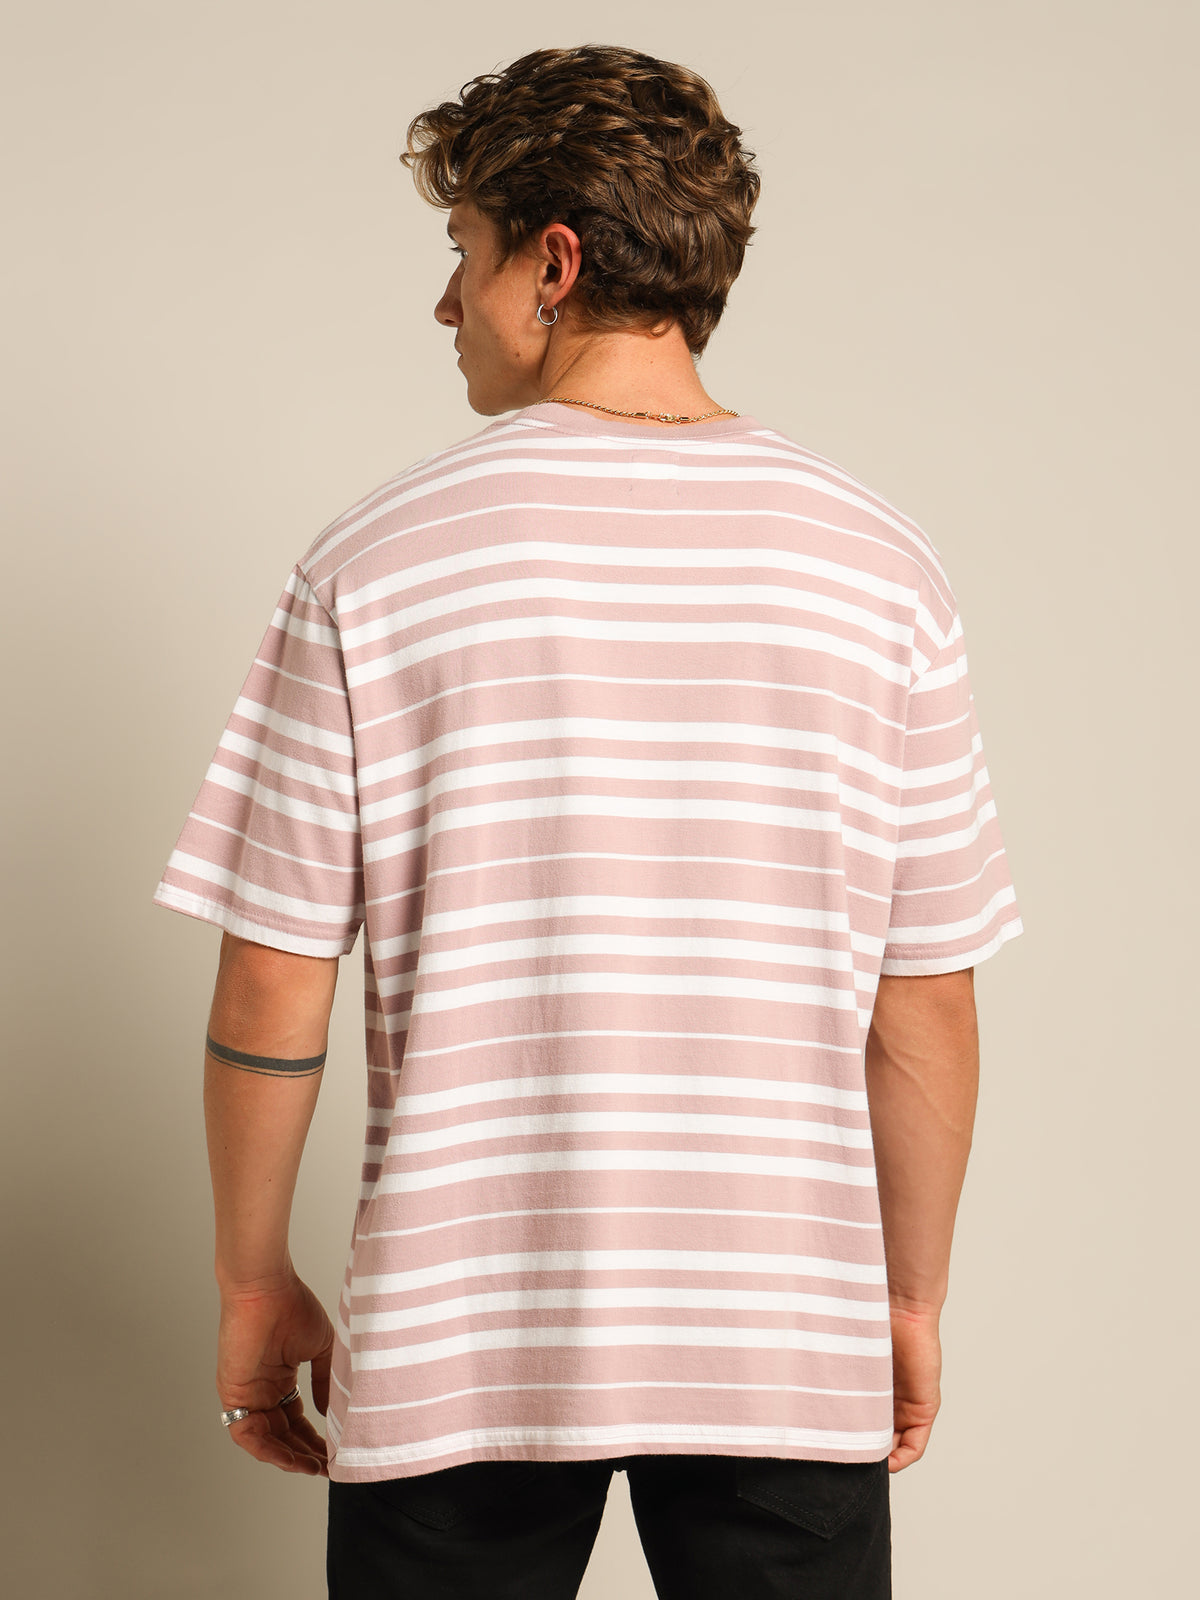 Stay Loose T-Shirt in Pink Lilac Stripe